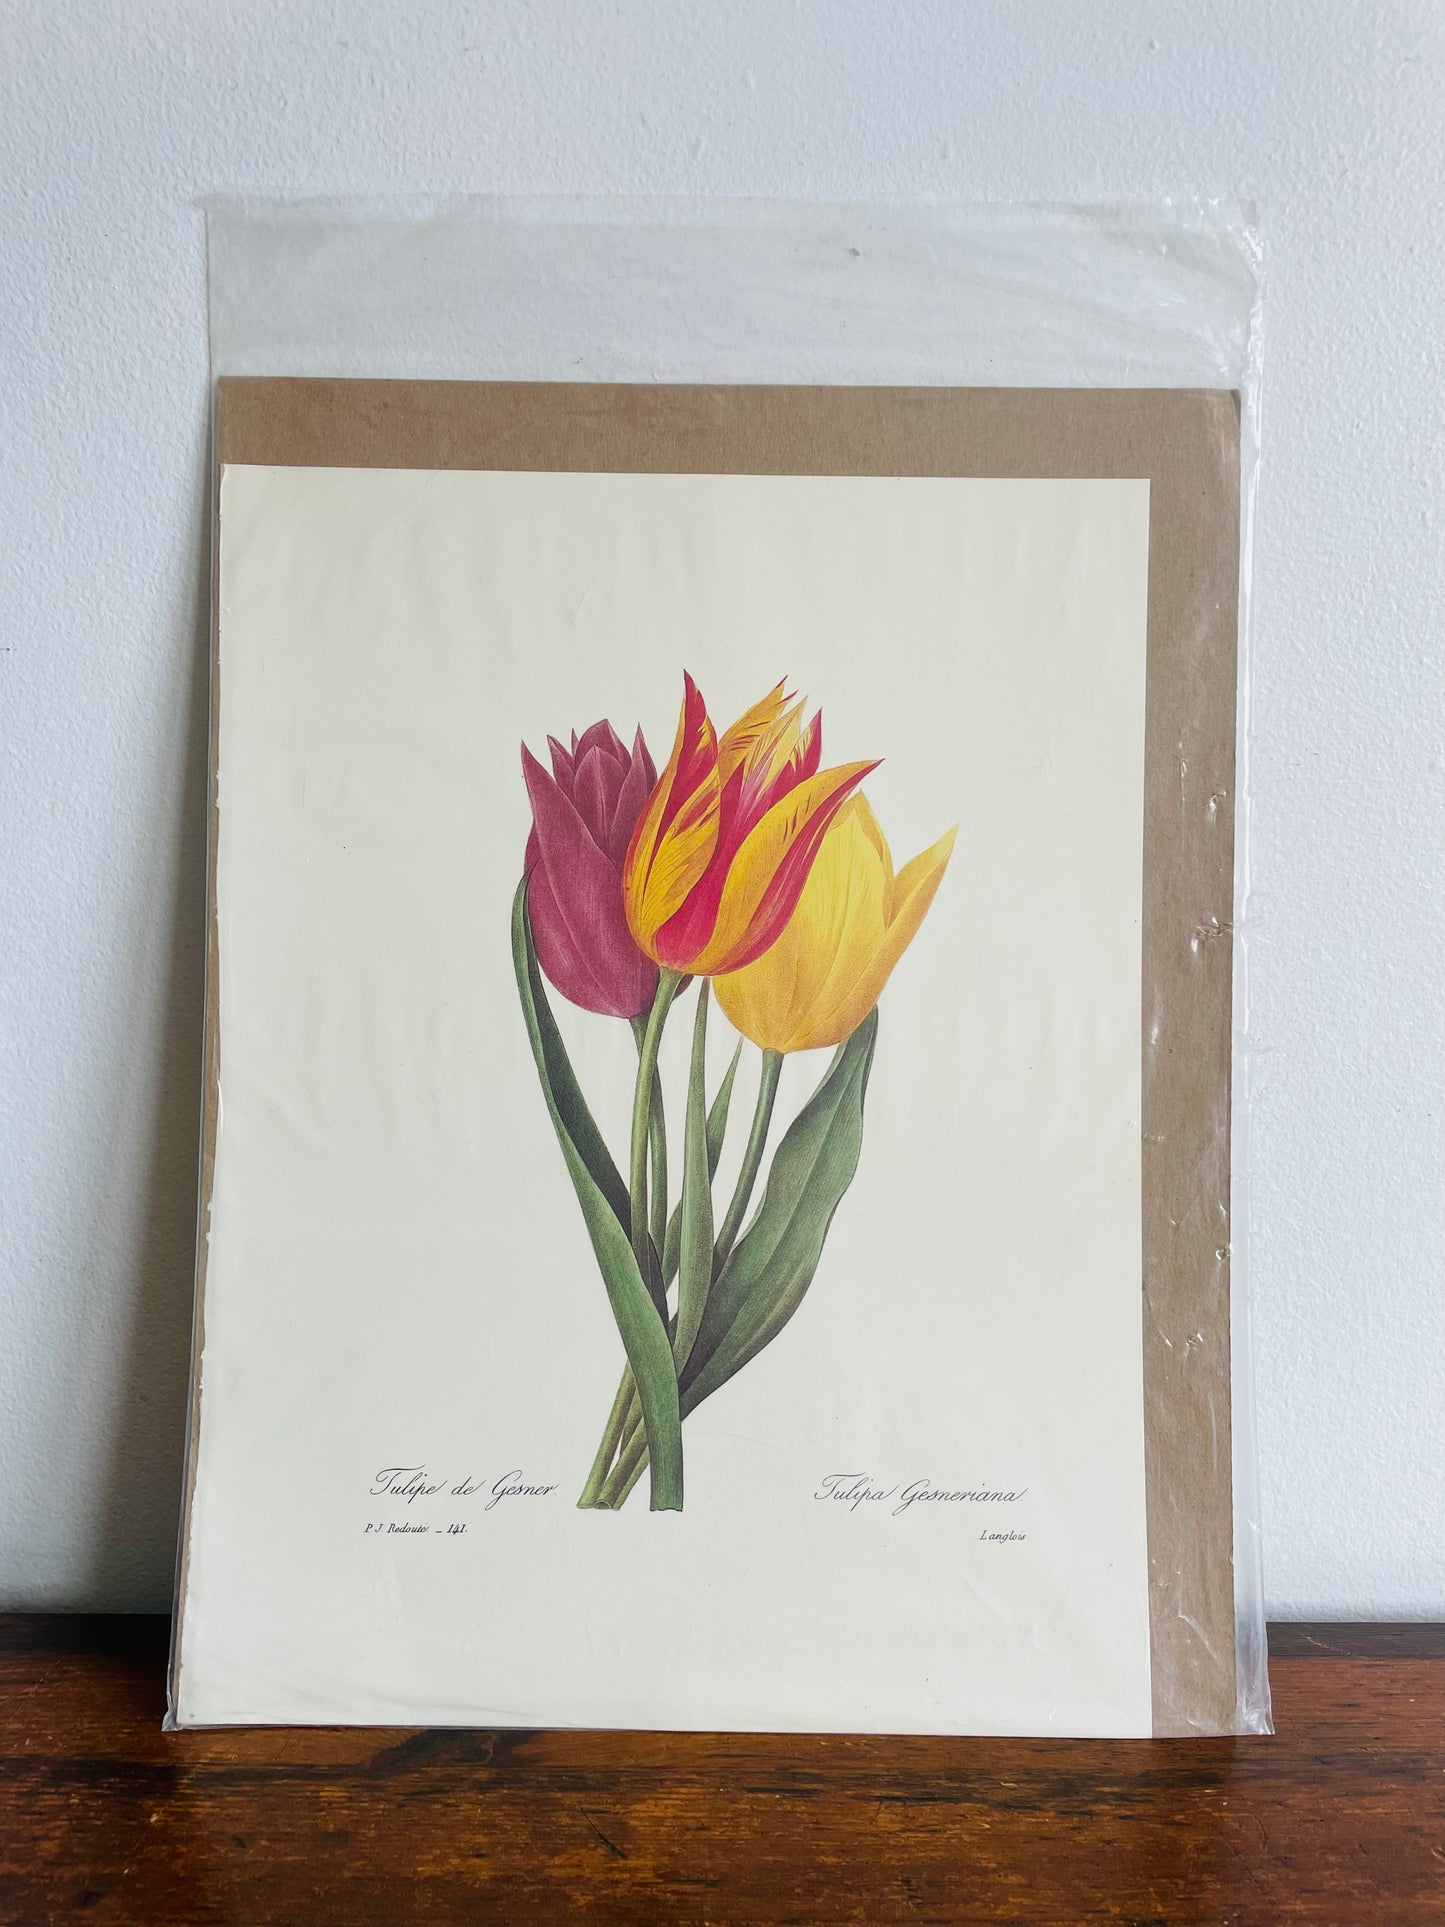 The Most Beautiful Flowers by Pierre Joseph Redoute Plate Reproduction Print - Garden Tulips